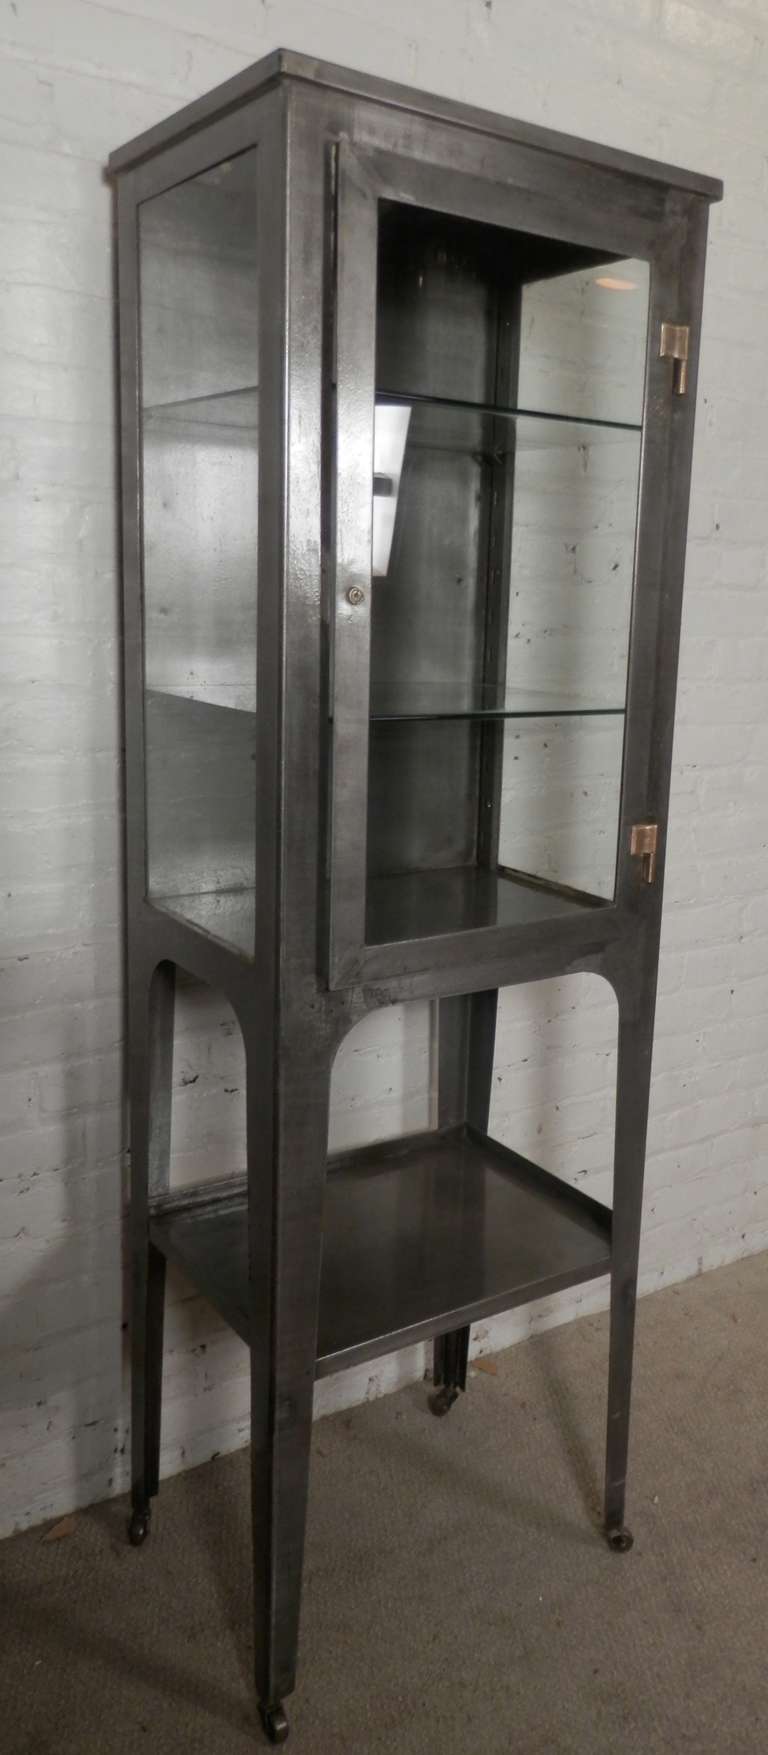 Metal cabinet with three glass sides, two glass shelves, nice brass accenting hardware. Attractive bare metal finish cabinet on casters, perfect for storage or display.

(Please confirm item location - NY or NJ - with dealer)